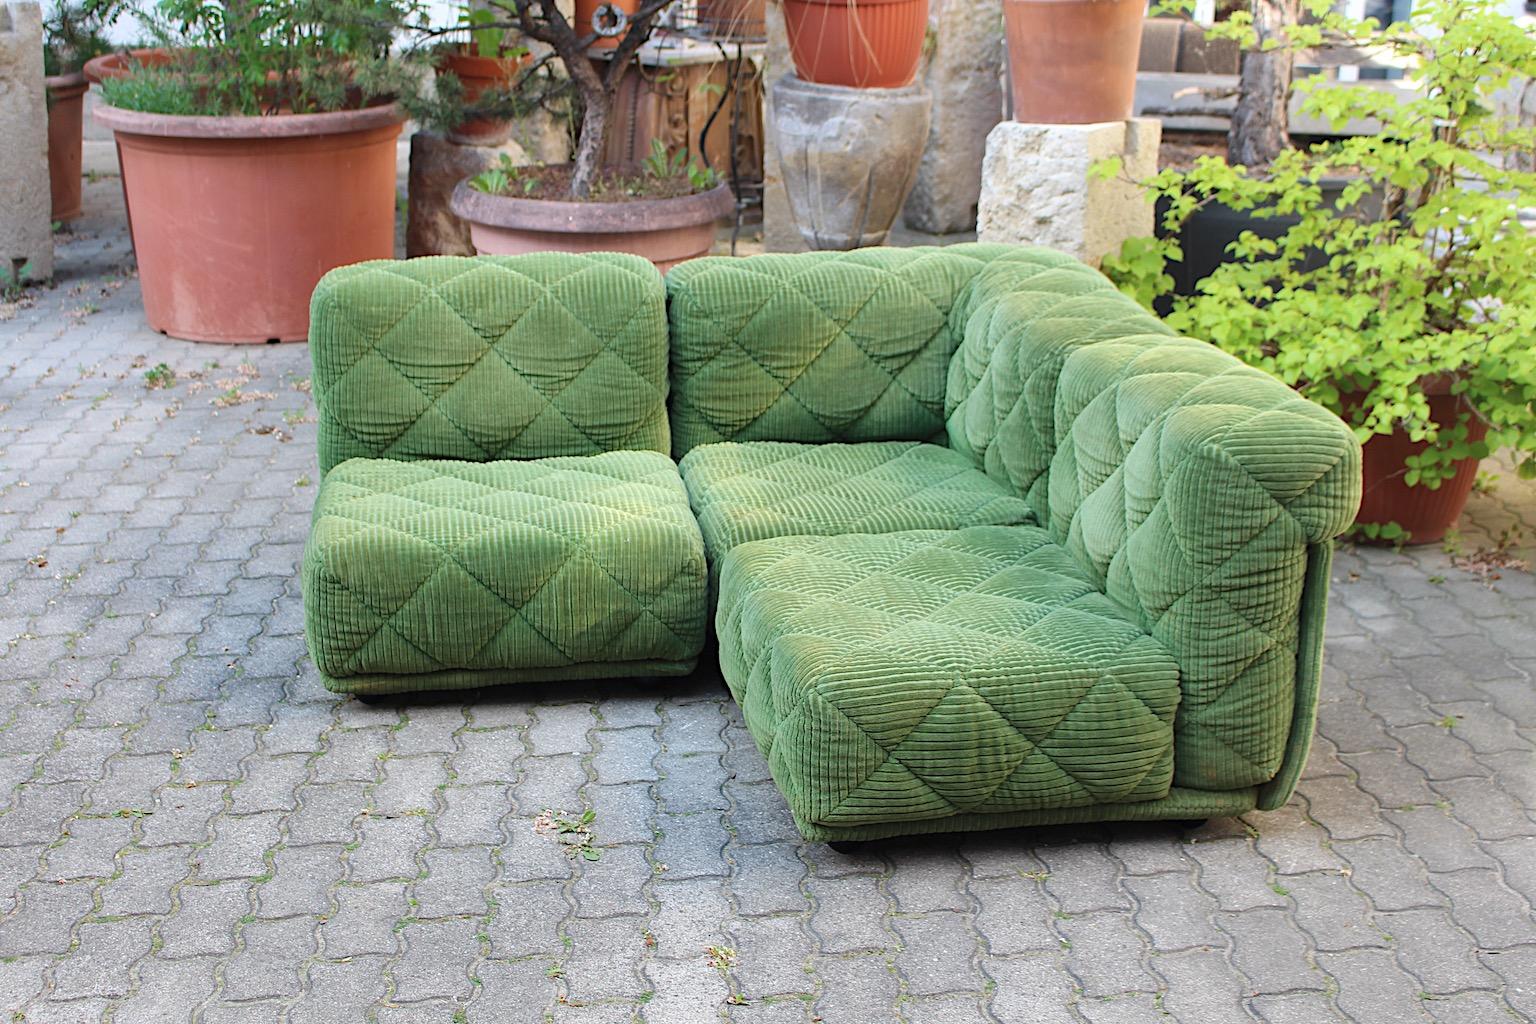 Space Age vintage freestanding modular sectional sofa elements model Rhombos from stitched corduroy in green color by Wittmann 1970s Austria.
A joyful and livable freestanding and modular sofa with three elements covered with cosy stitched corduroy